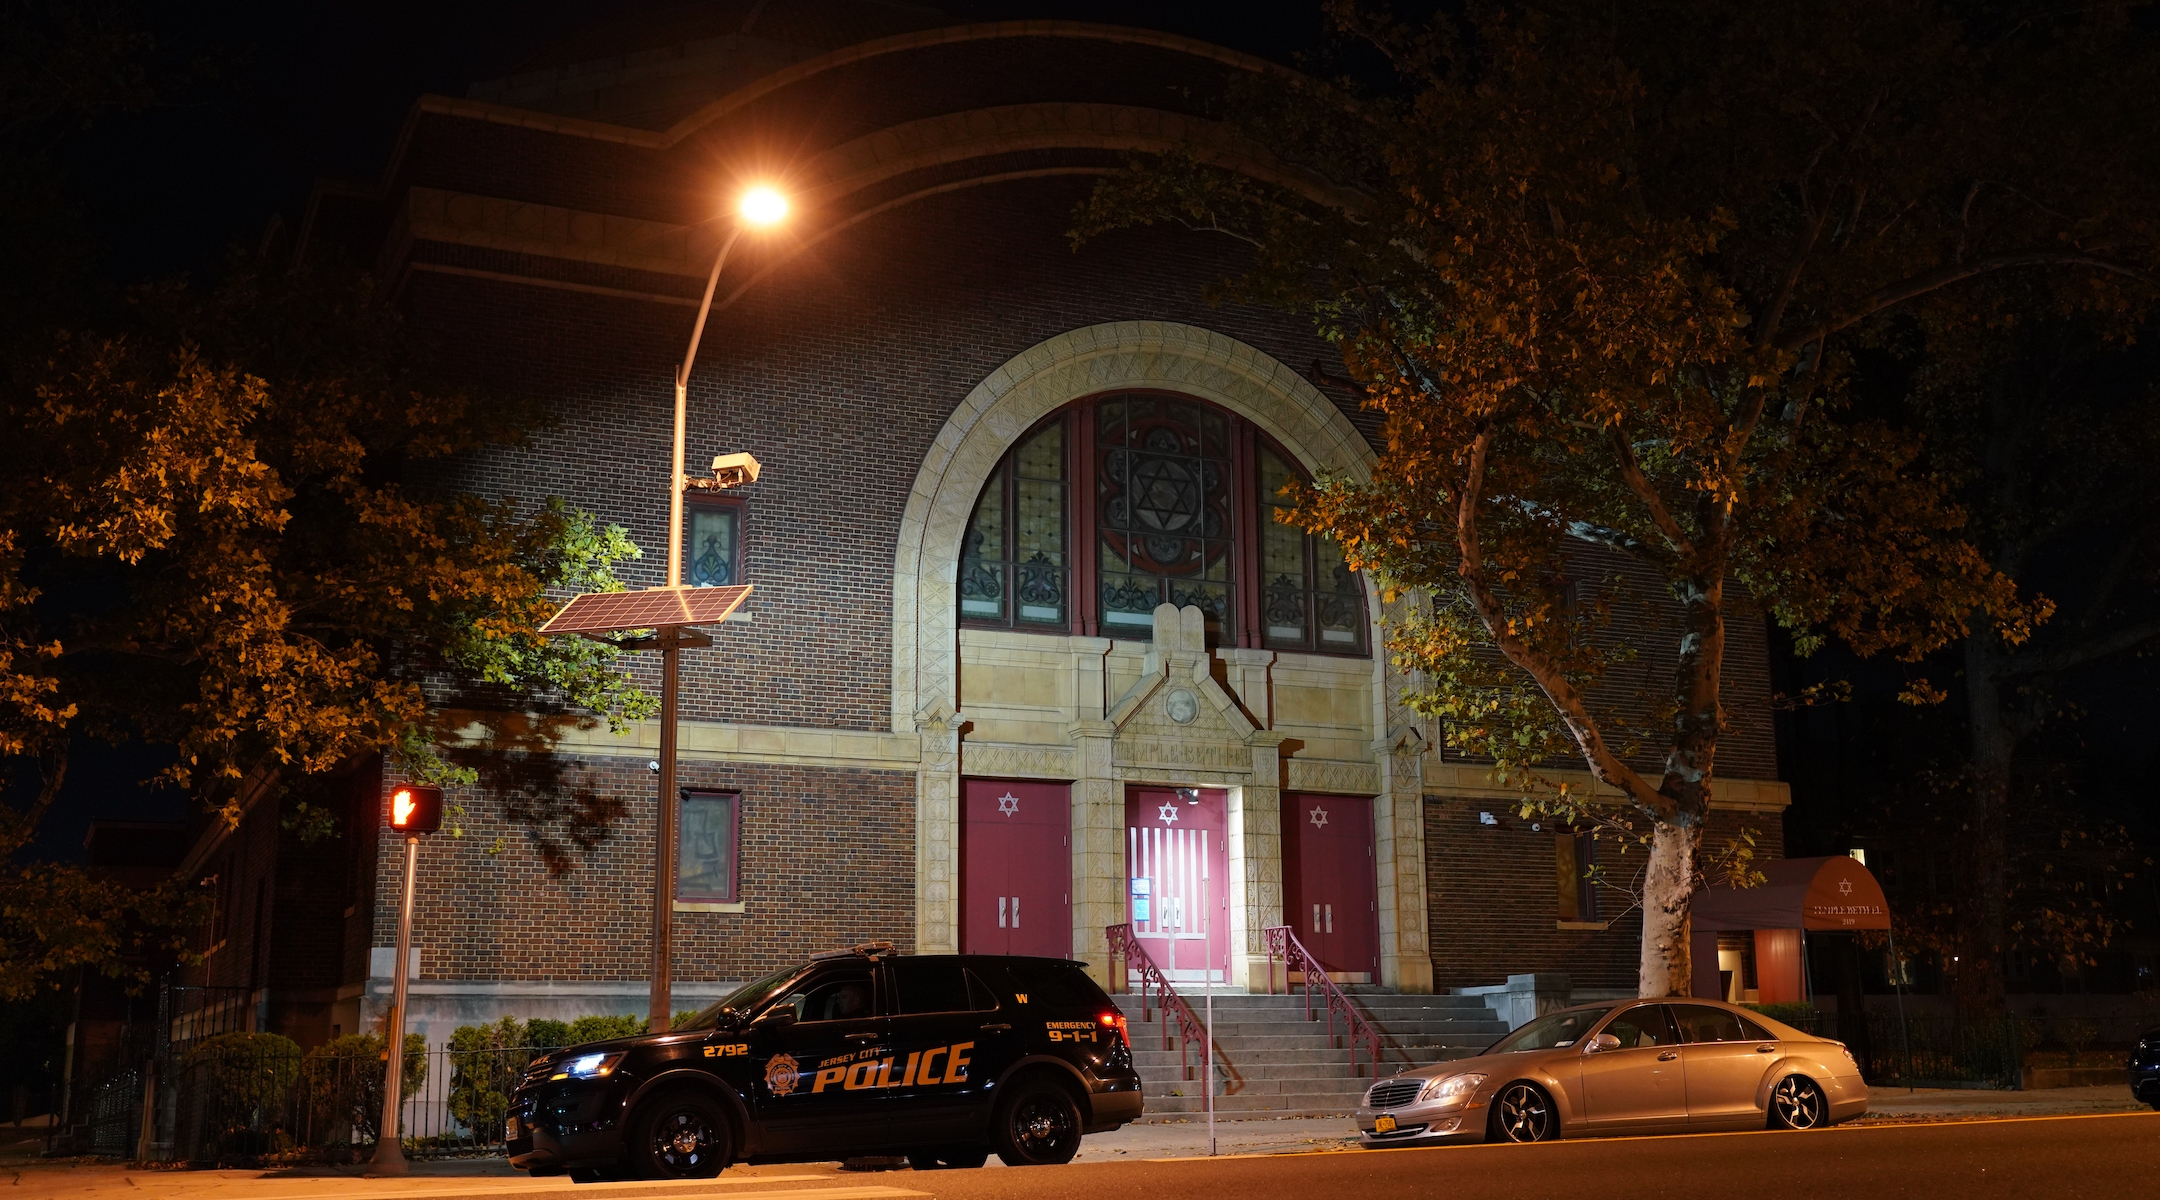 The FBI’s Newark office issued a stark warning as it announced it had received “credible information” about a nonspecific but widescale threat to synagogues in New Jersey on Nov. 3, 2022. (Lokman Vural Elibol/Anadolu Agency via Getty Images)